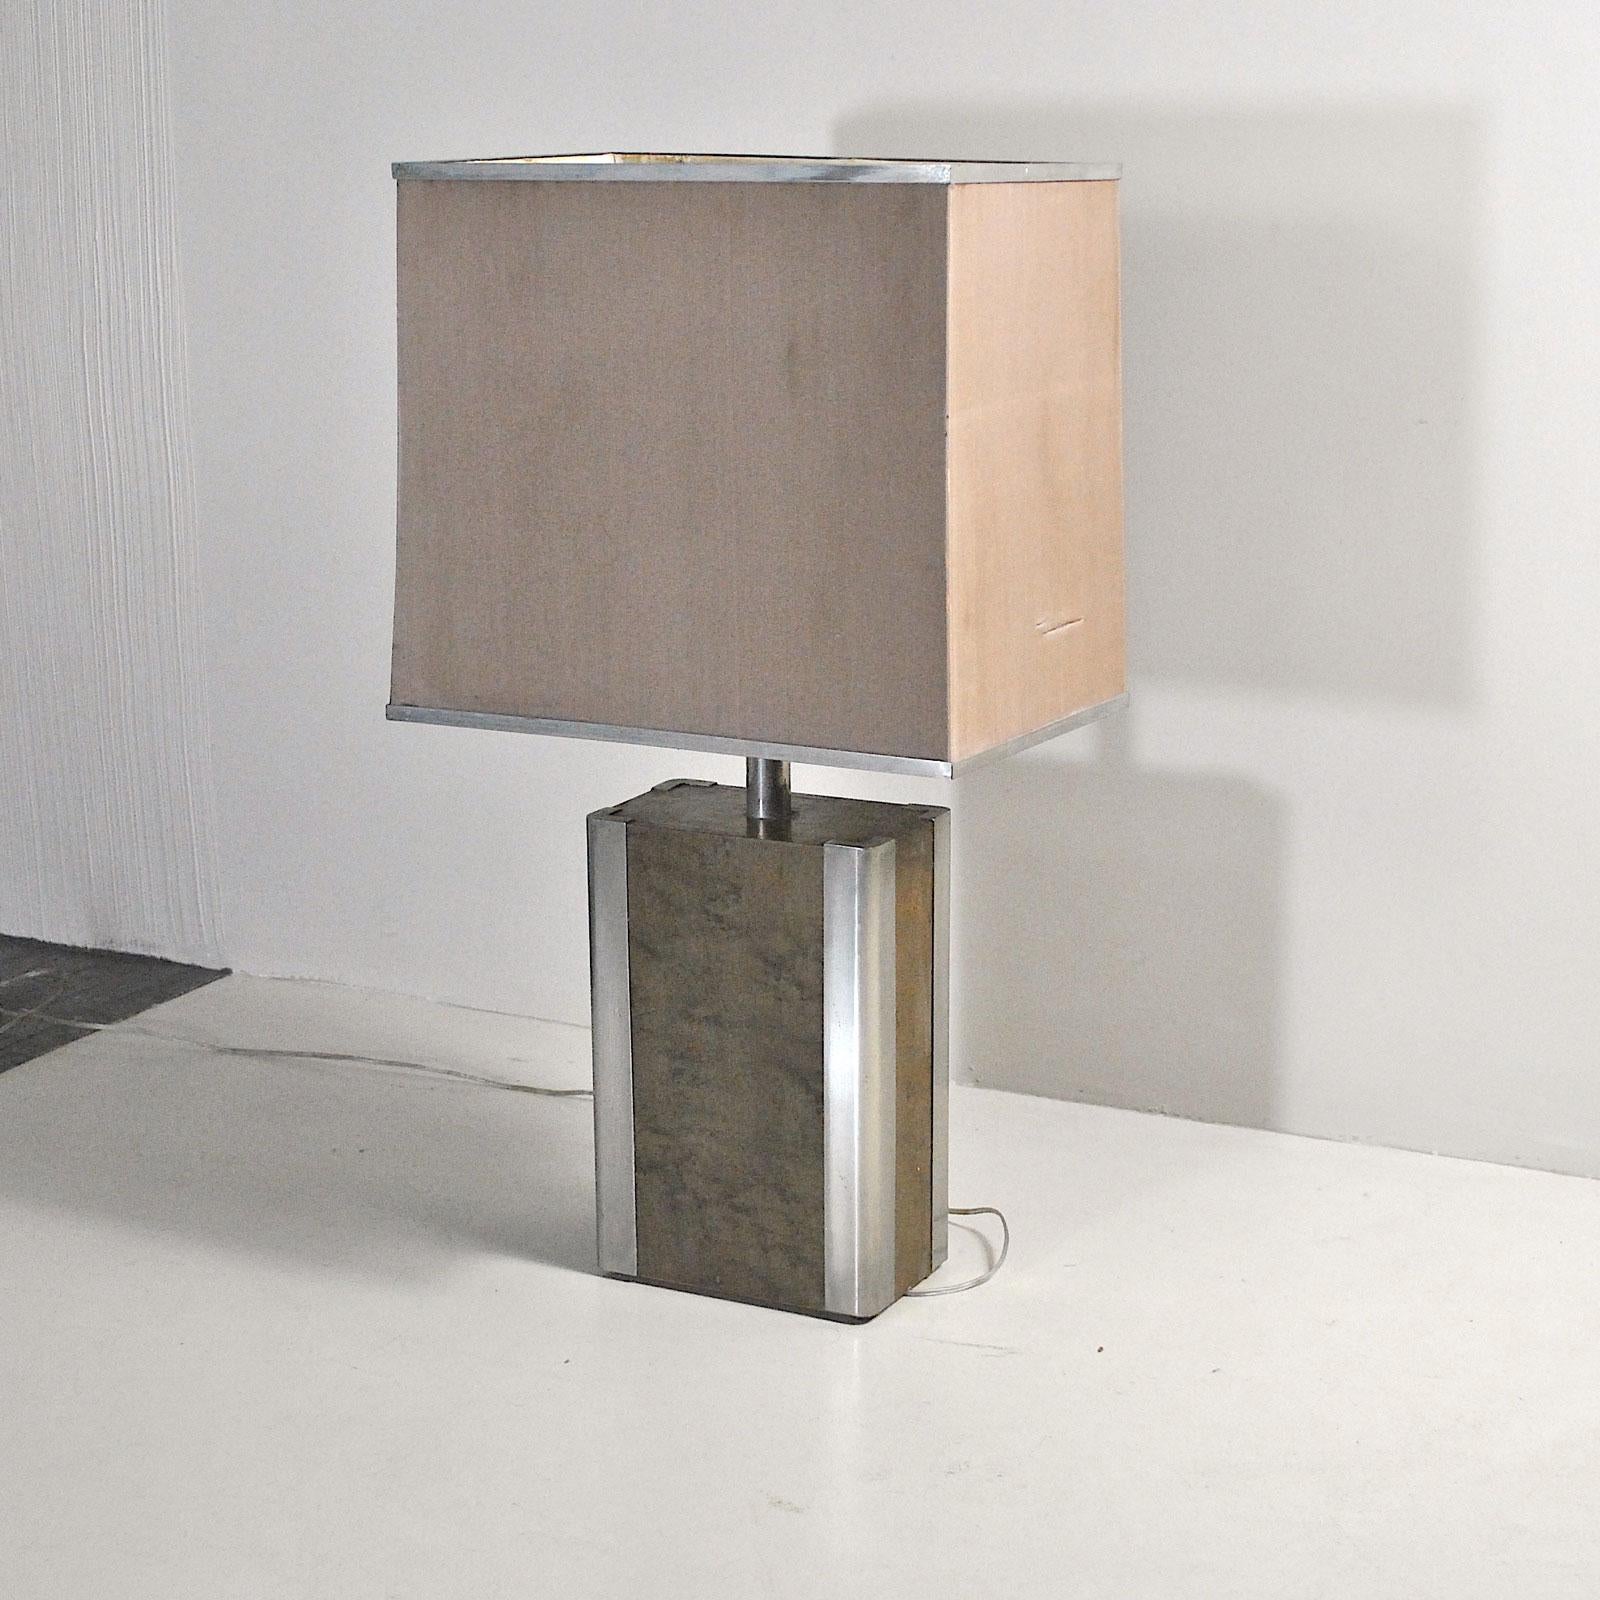 Late 20th Century Italian Midcentury Table Lamp in Drawn Wood and Steel from the 1970s For Sale